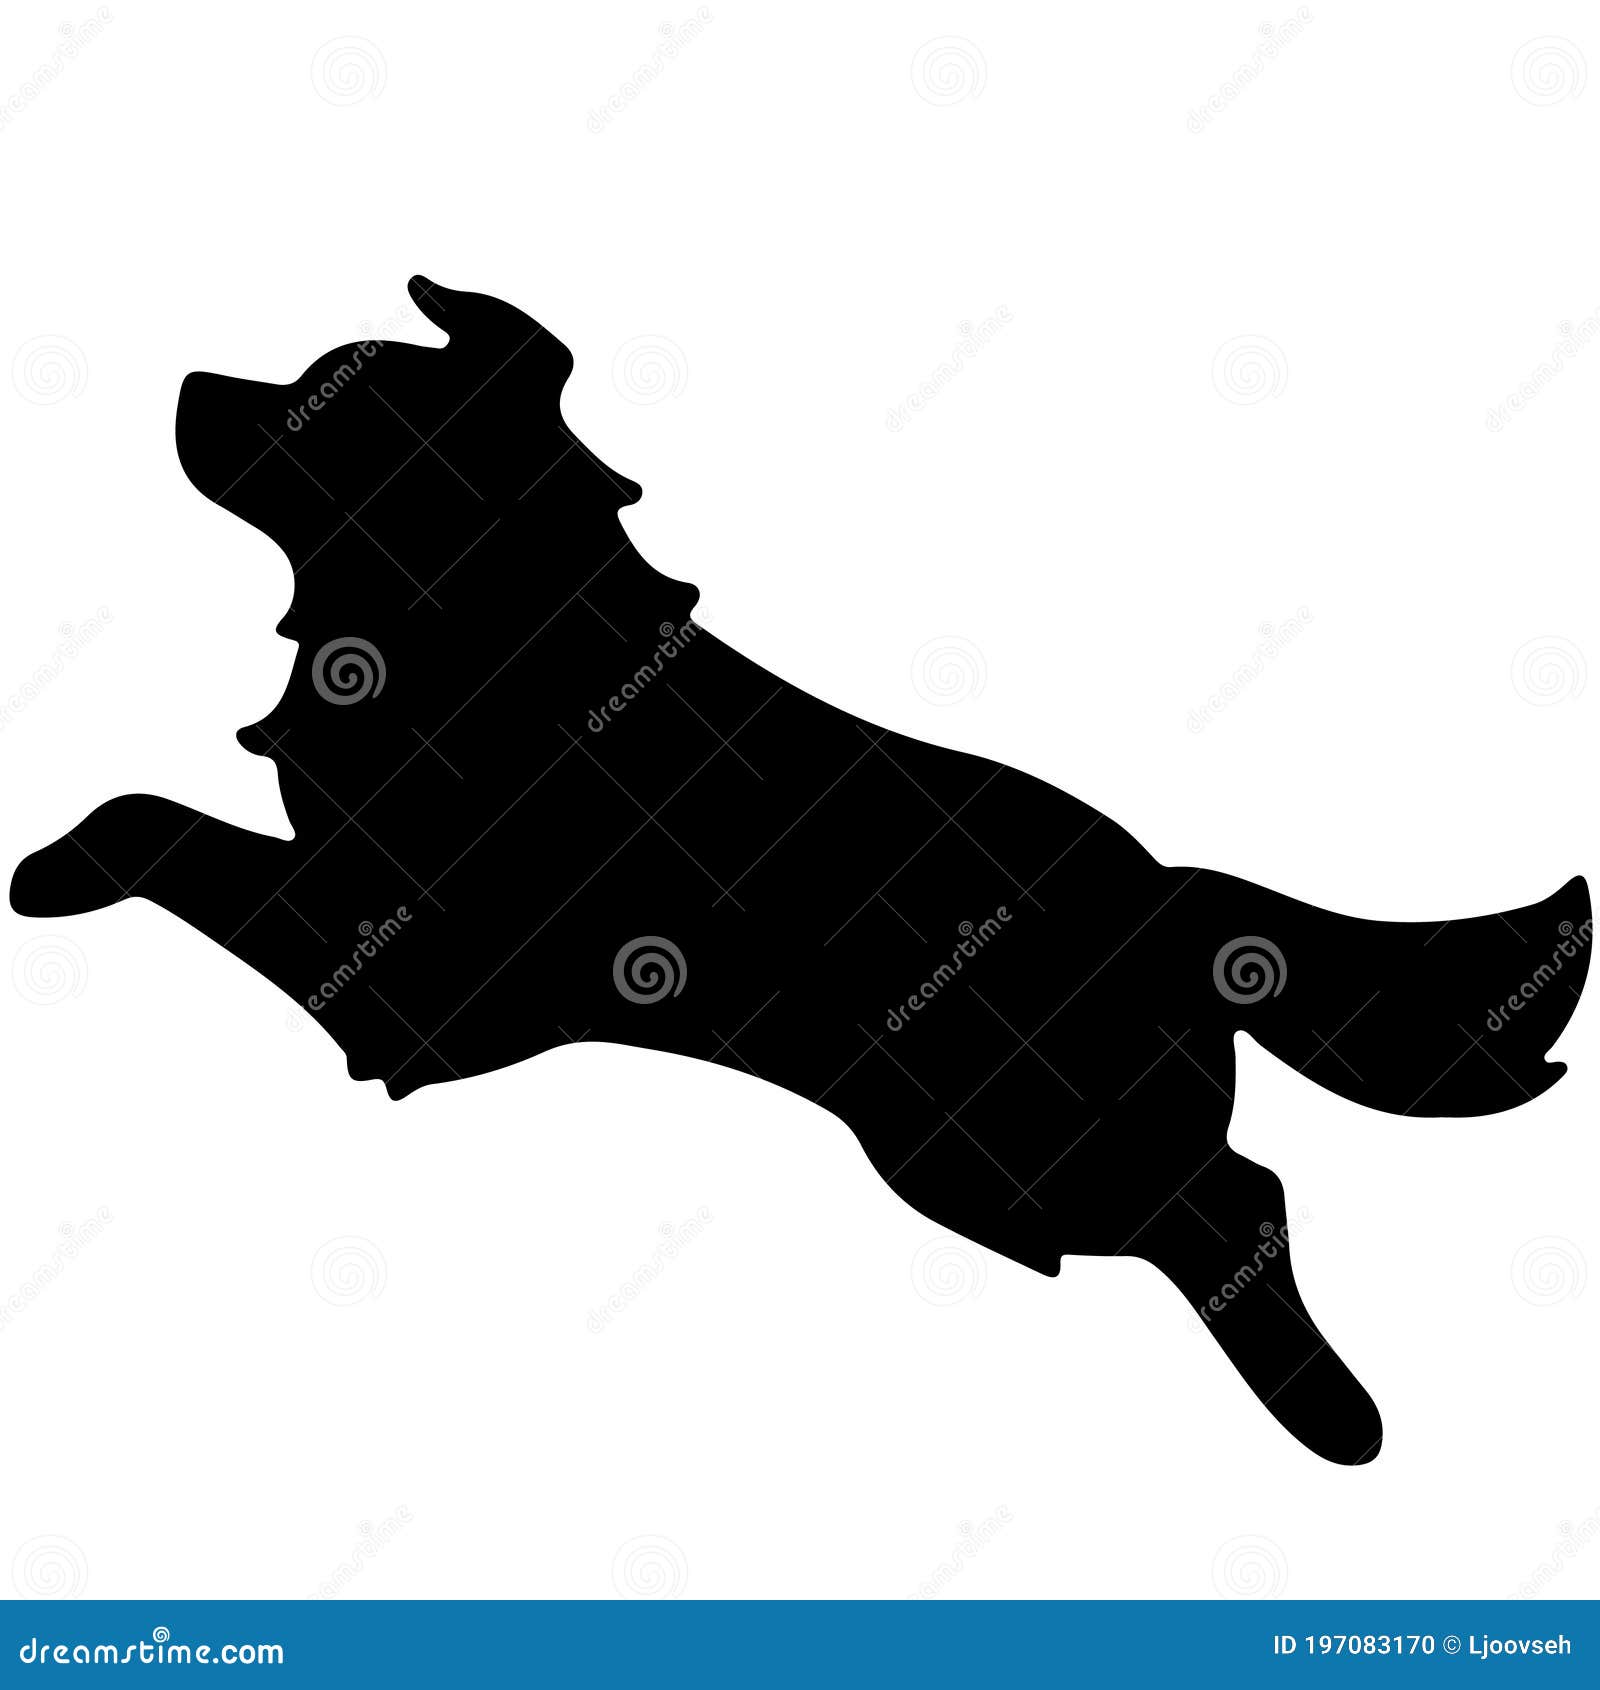 39+ Border Collie Jumping Silhouette Image - Bleumoonproductions